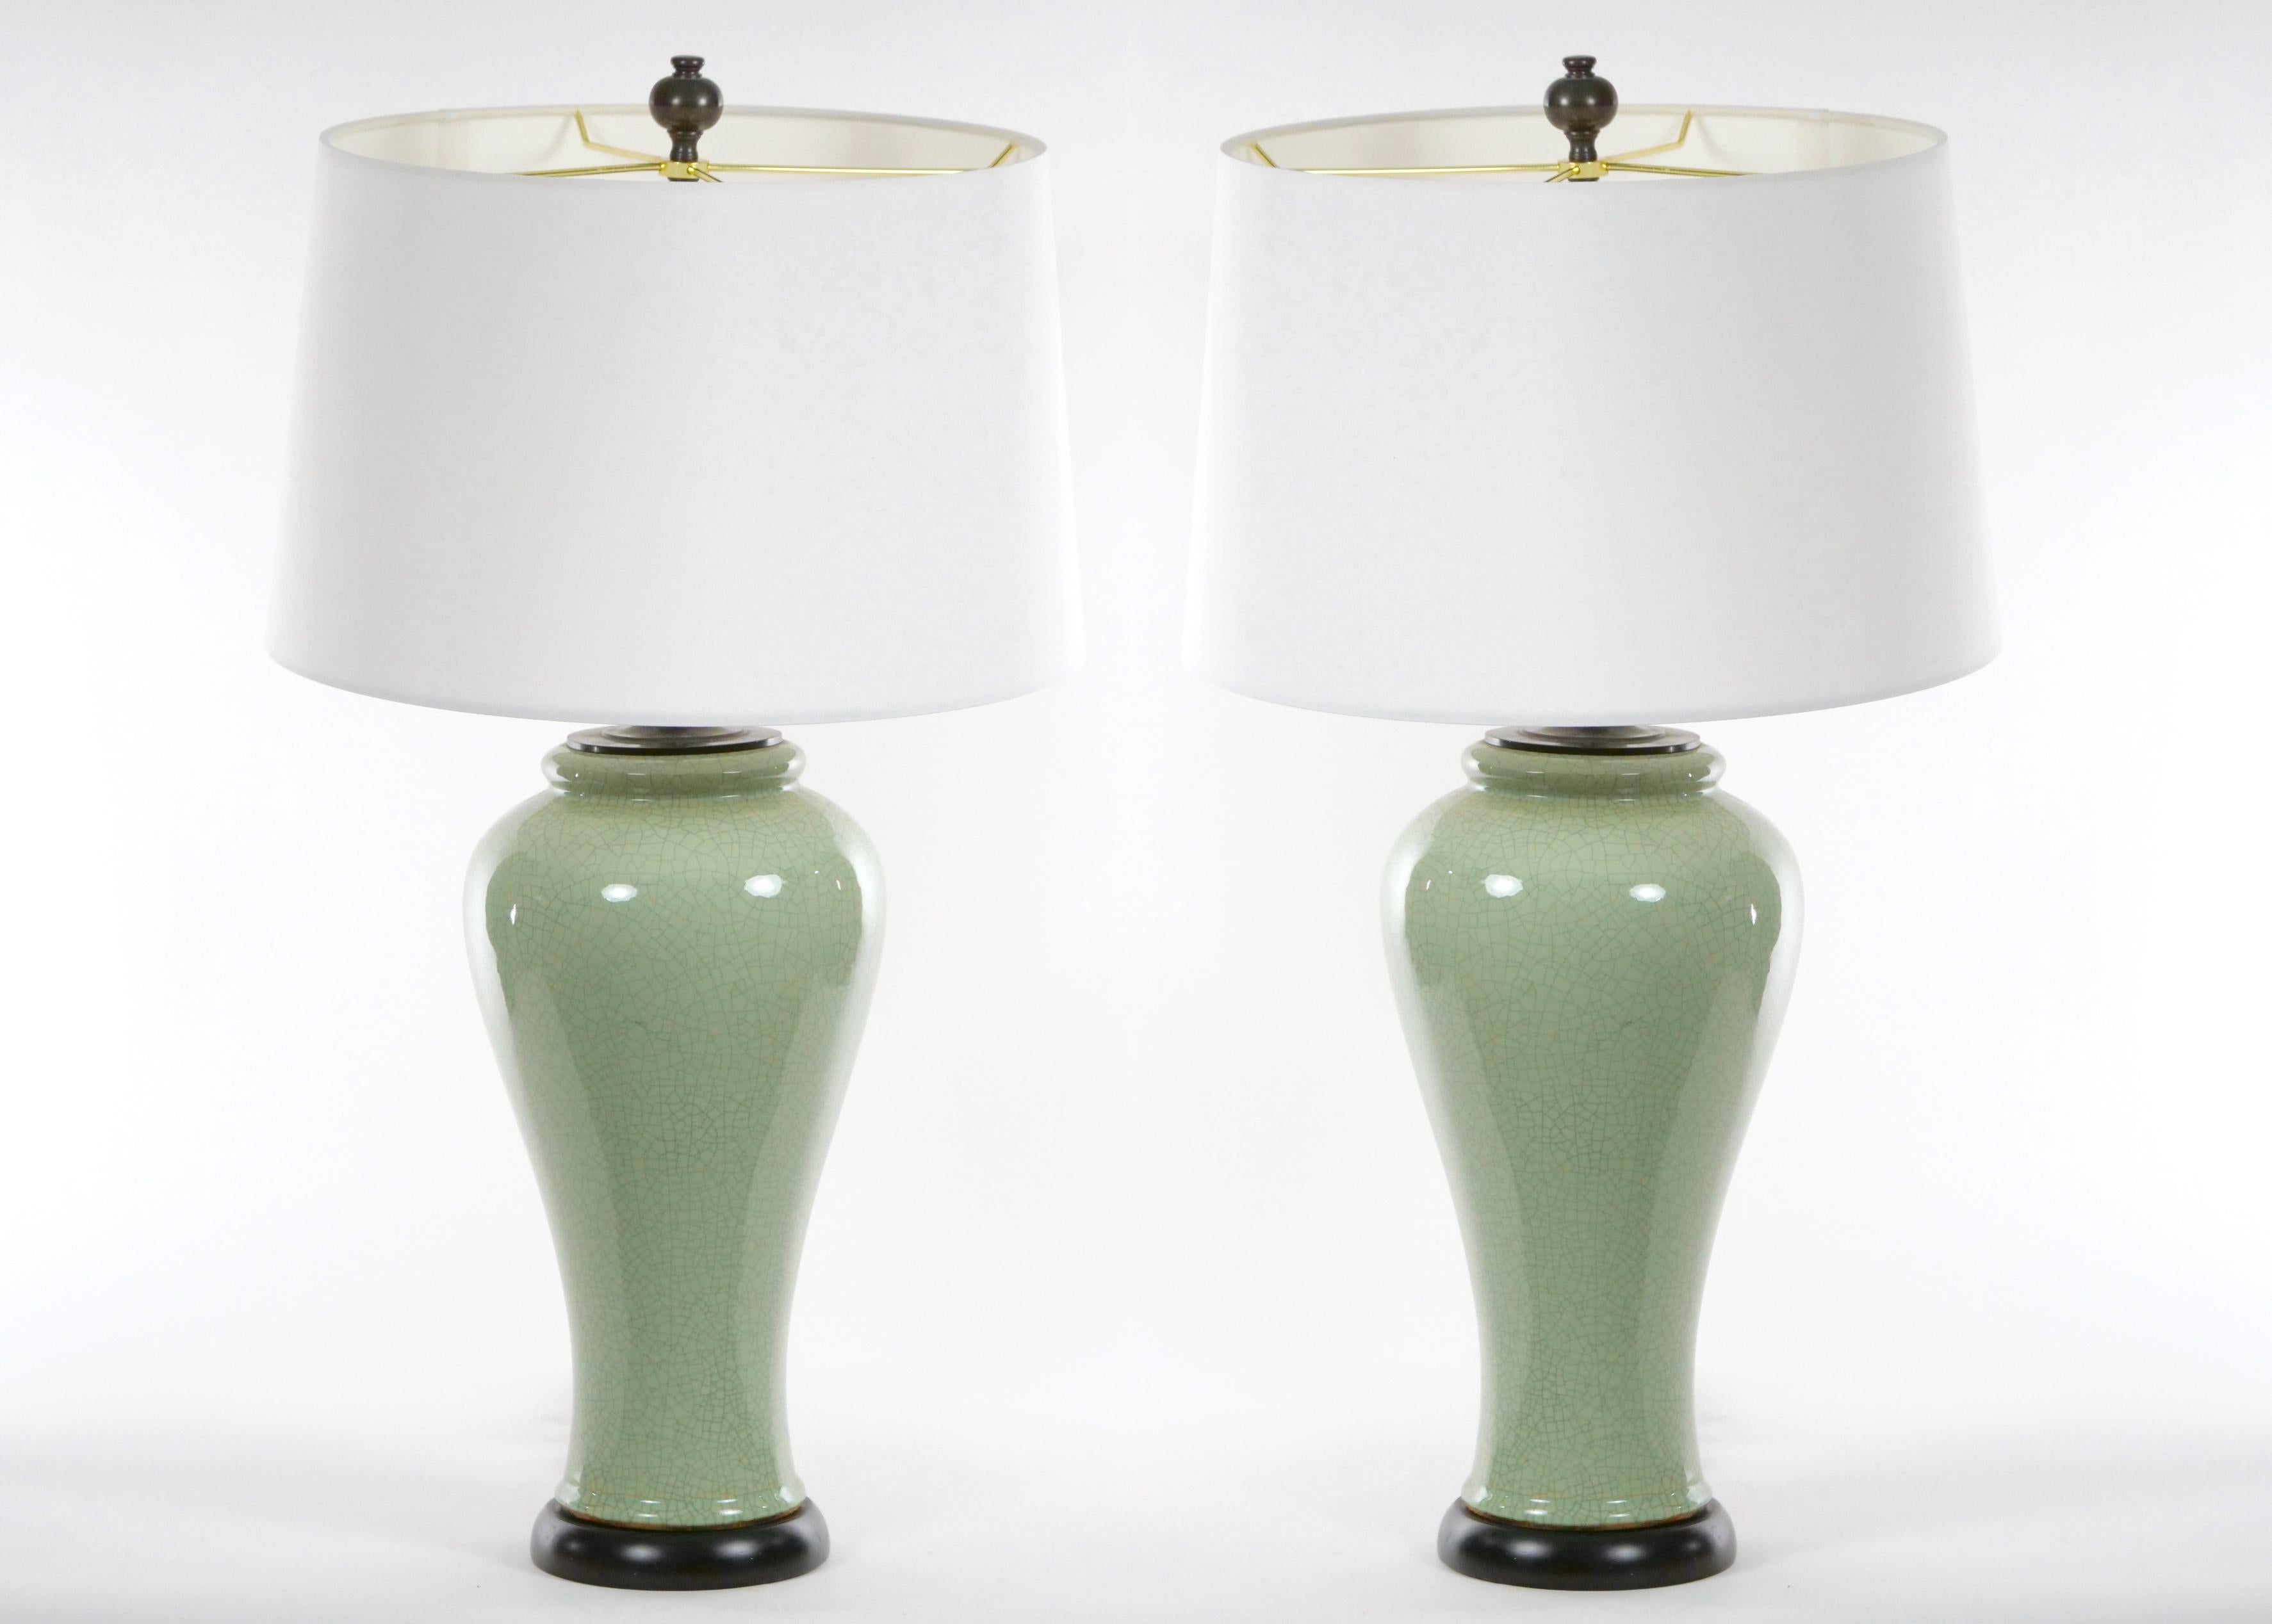  Chinese Pair Celadon Crackle Porcelain Table Lamp 4